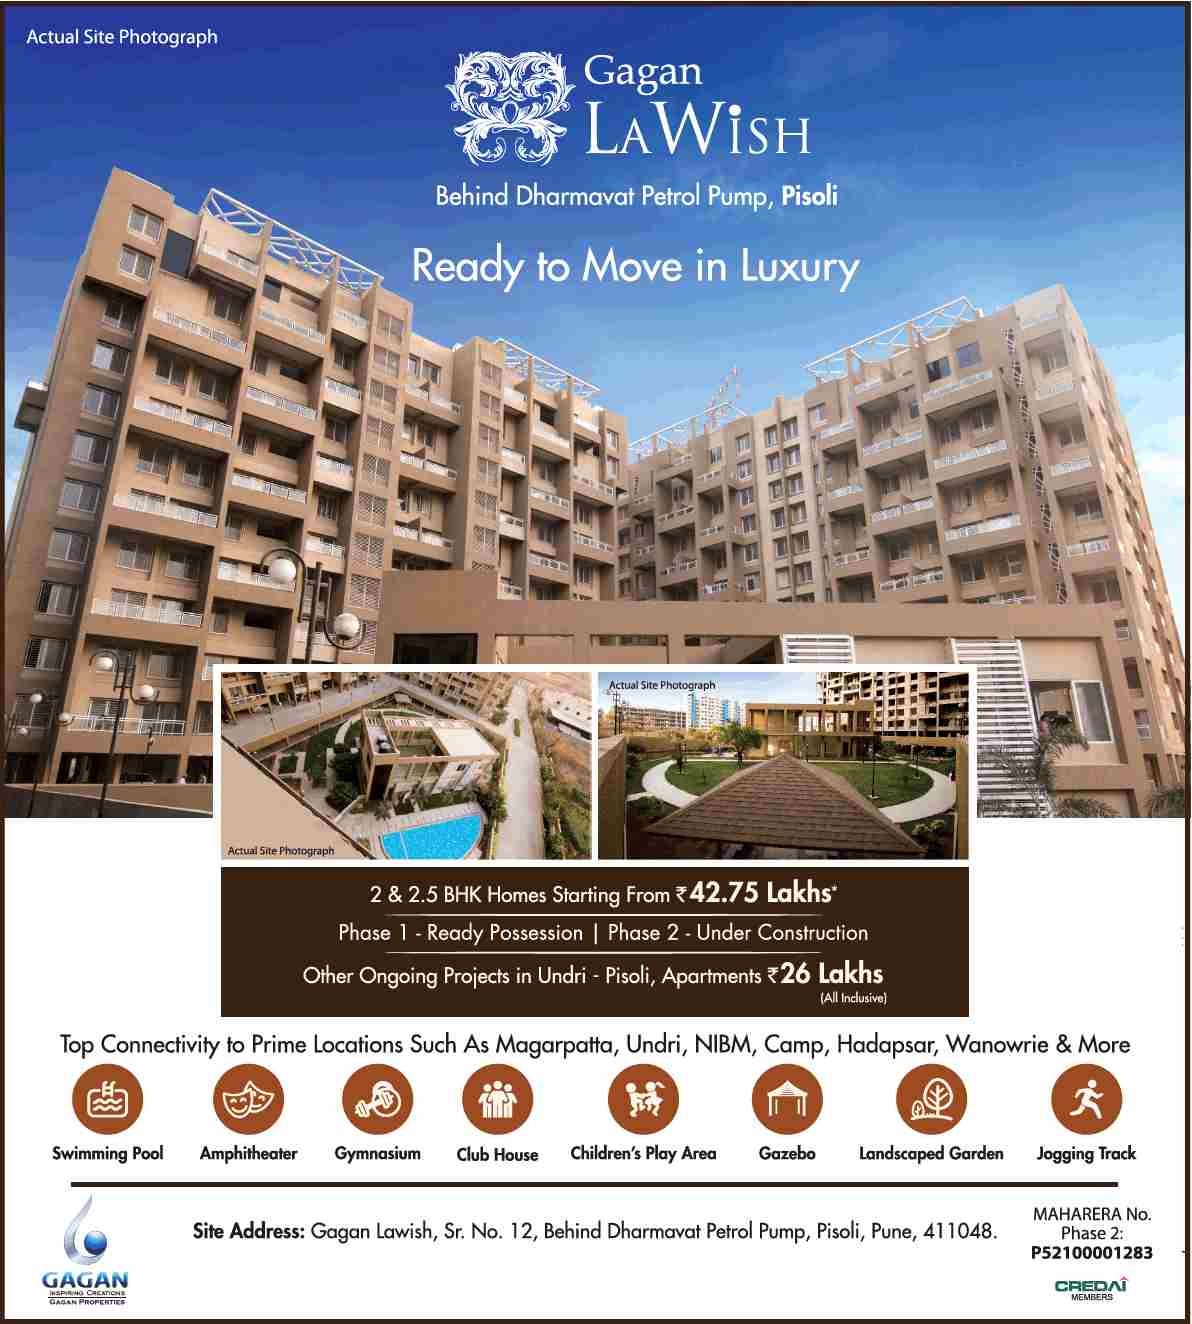 Live in ready to move in luxury homes at Gagan Lawish in Pune